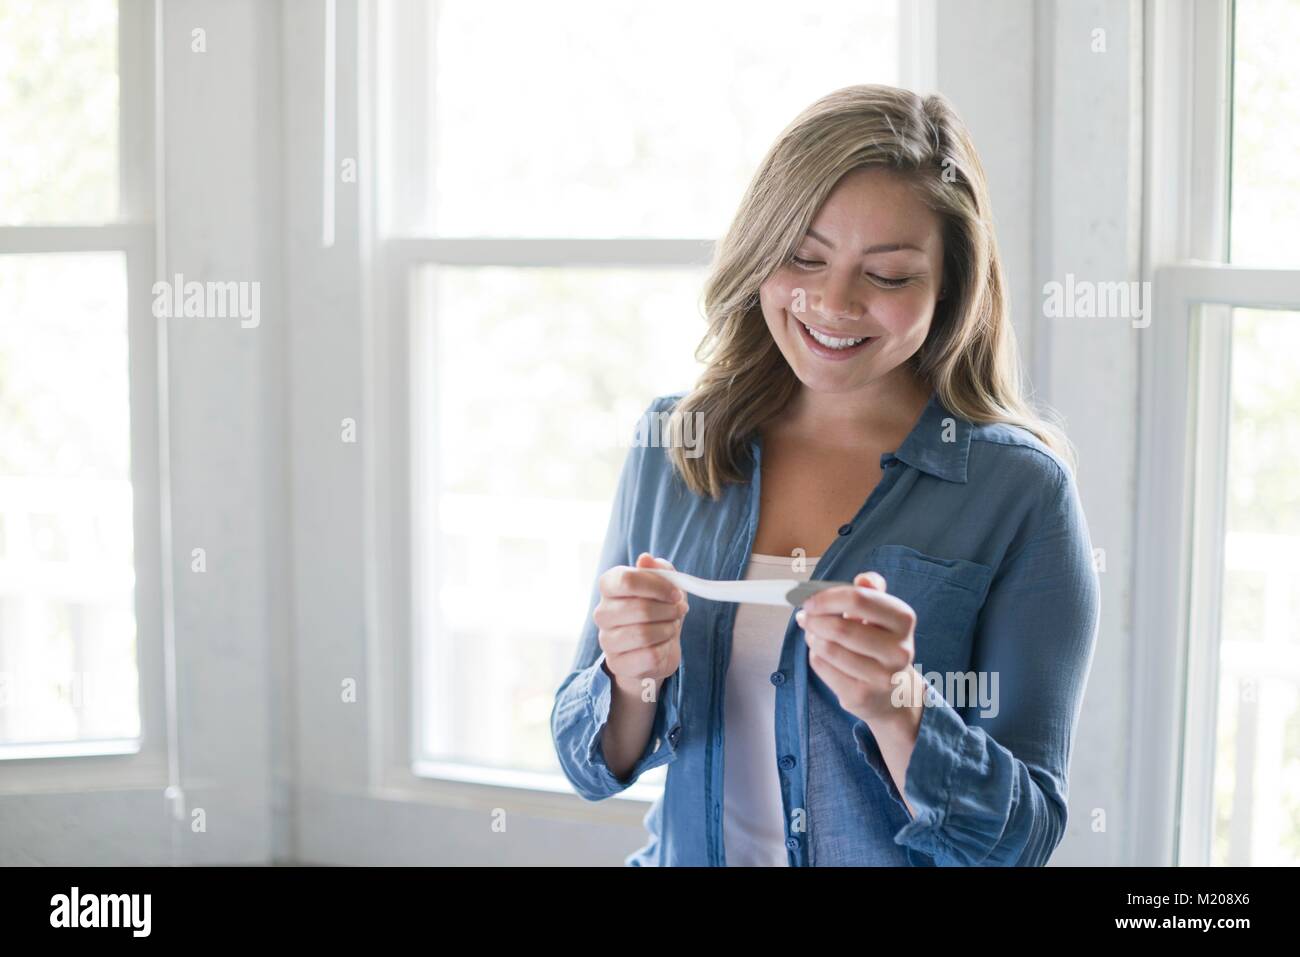 Portrait of young woman with pregnancy test, smiling. Stock Photo